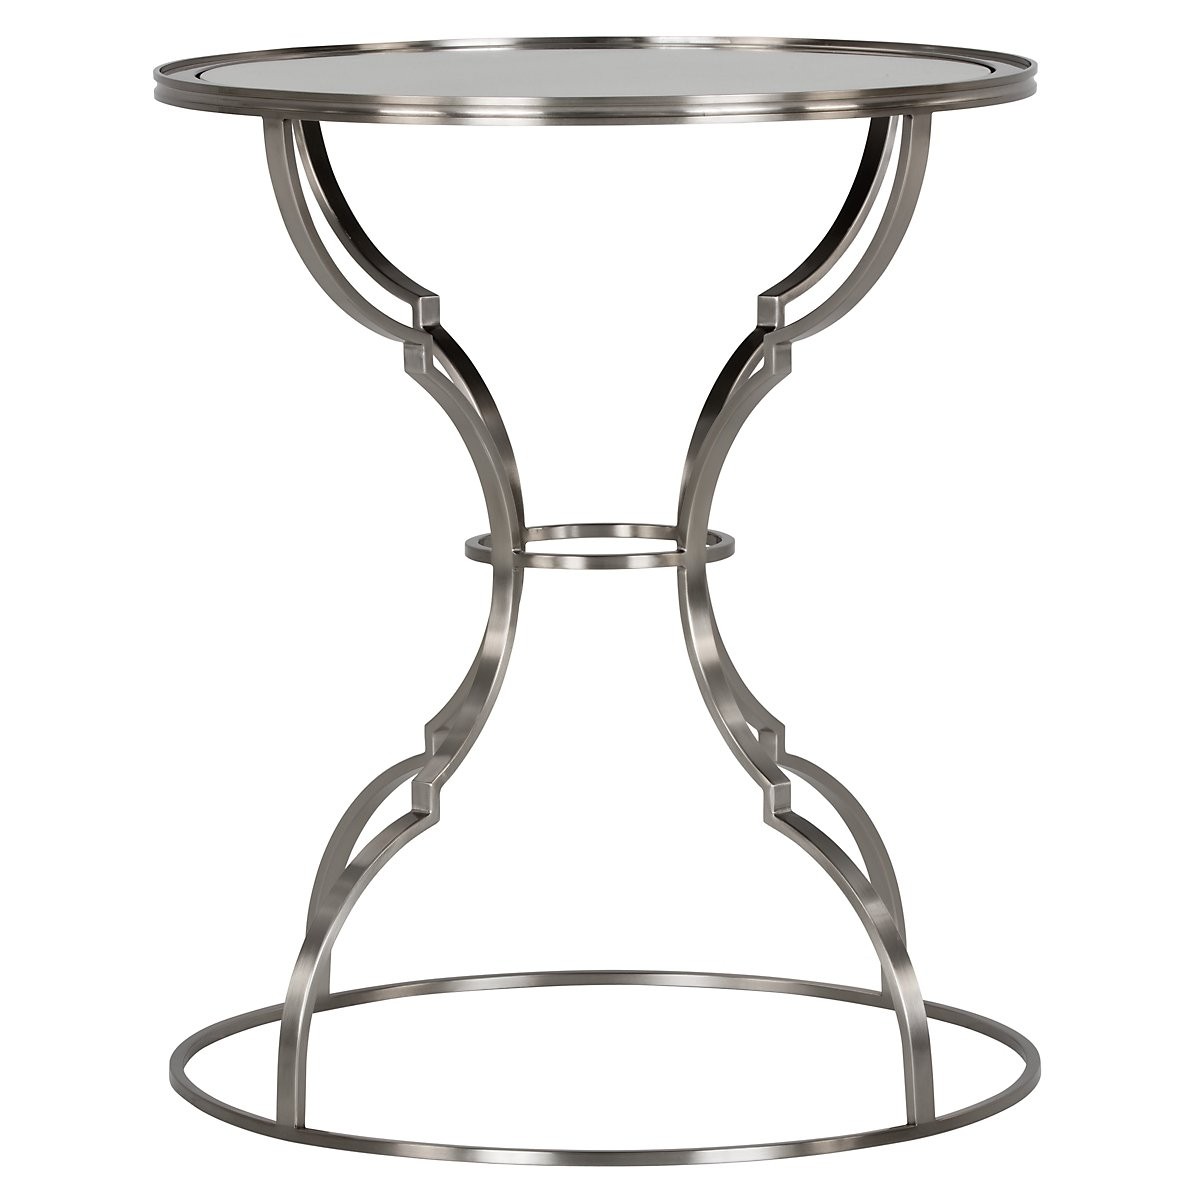 City furniture laurel large mirrored round end table